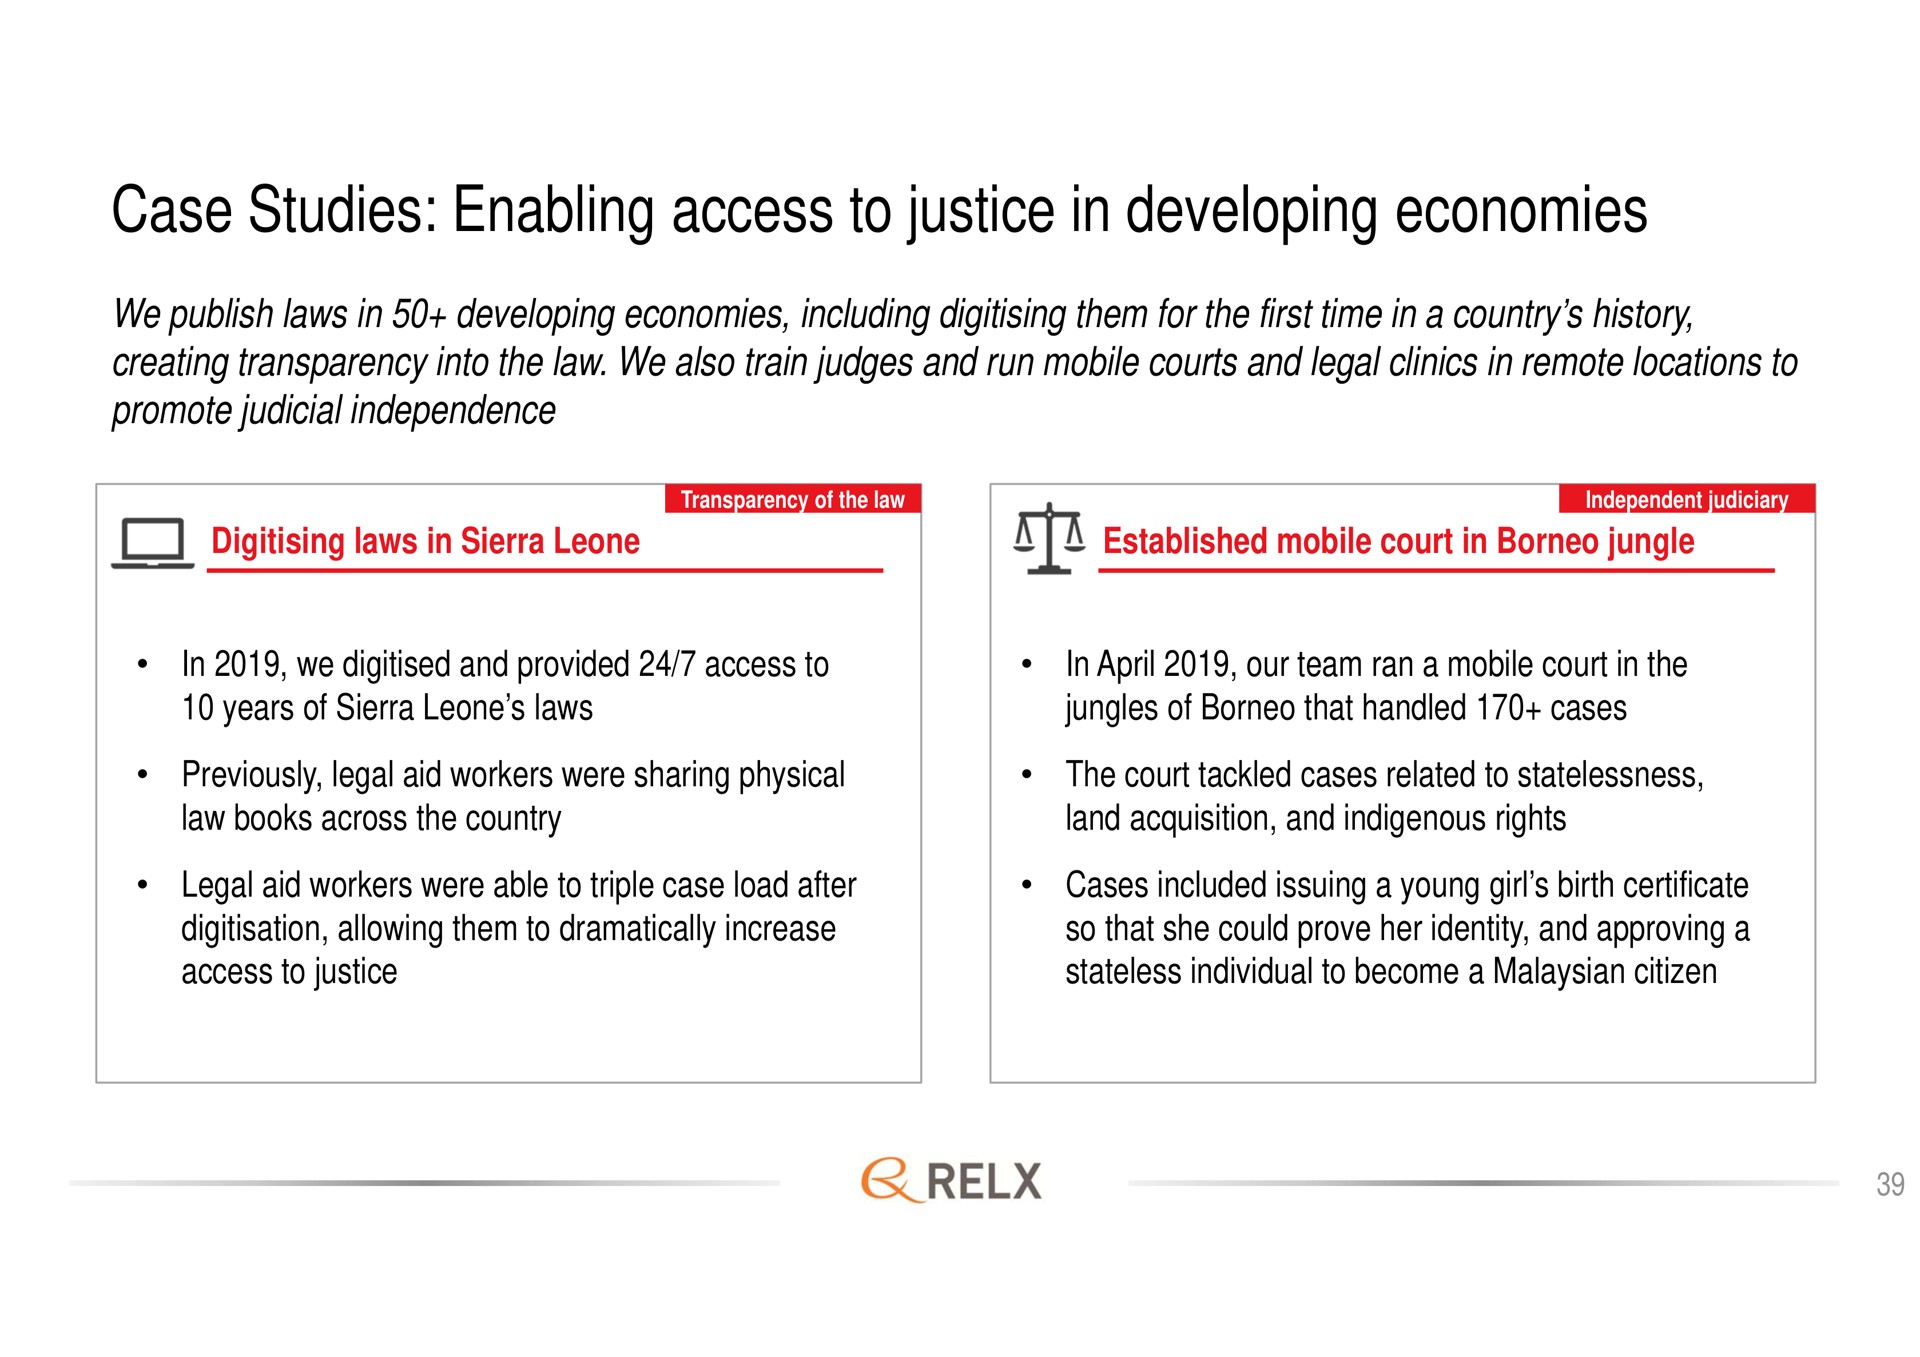 case studies enabling access to justice in developing economies laws sierra a established mobile court jungle | RELX